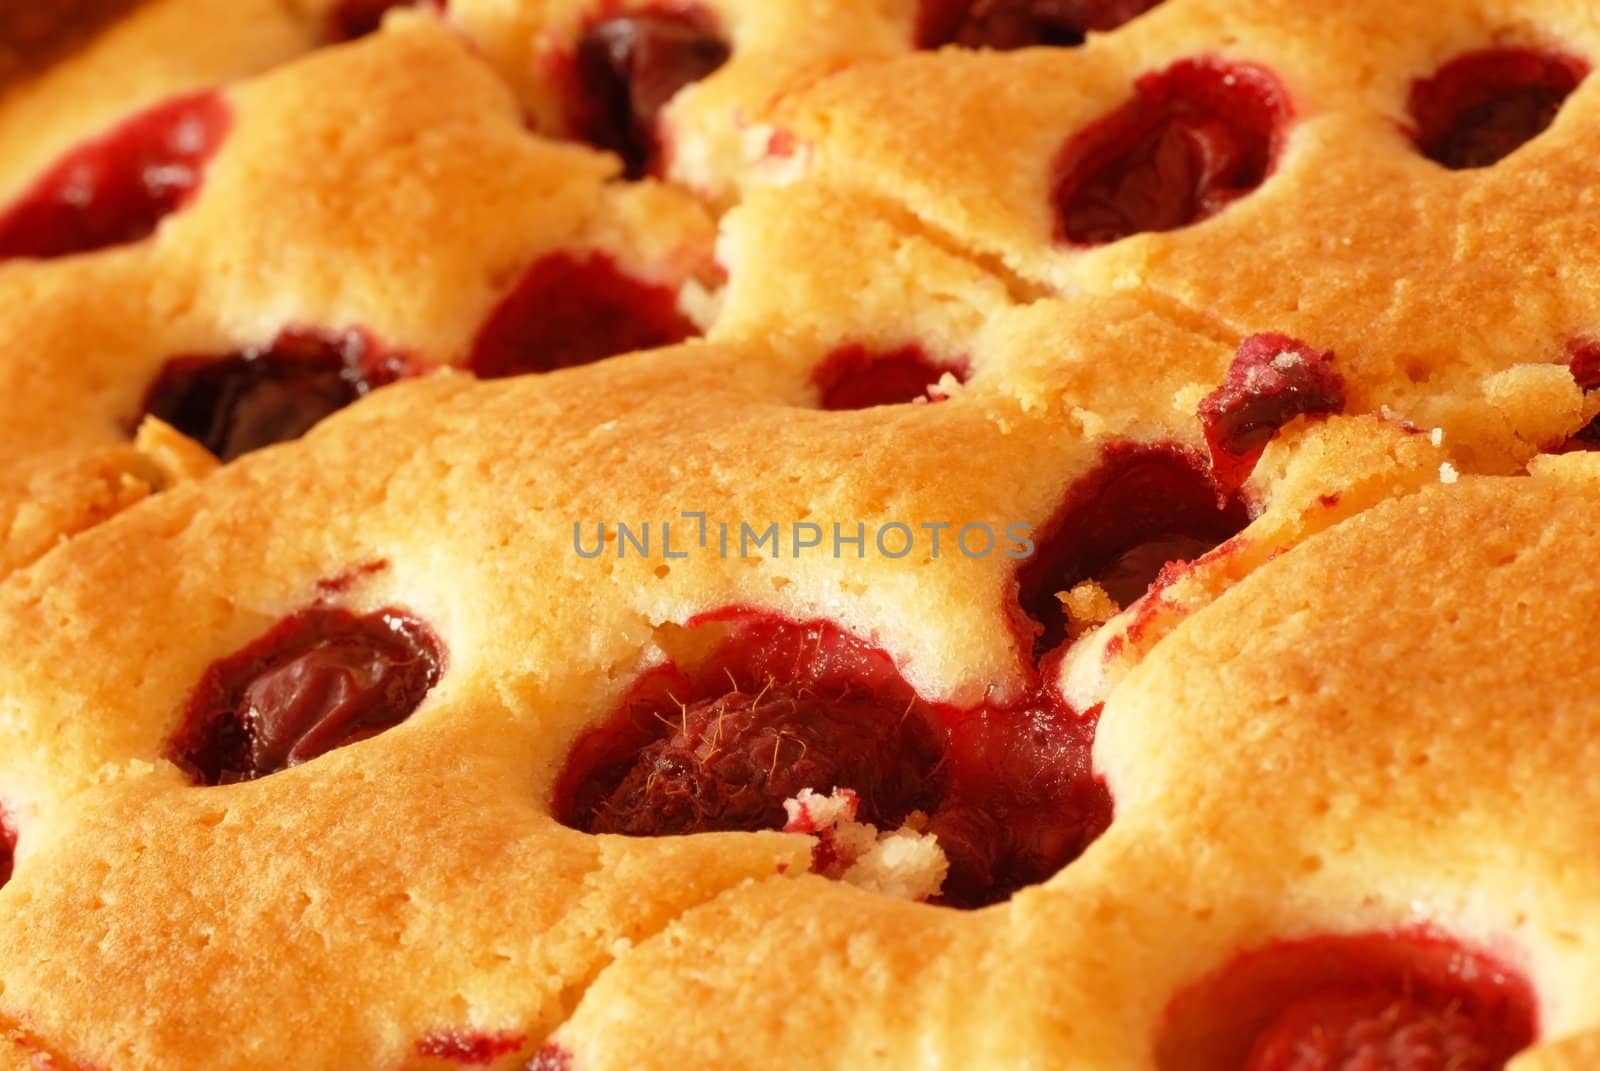 baked fruity cake with cherries and raspberries macro background